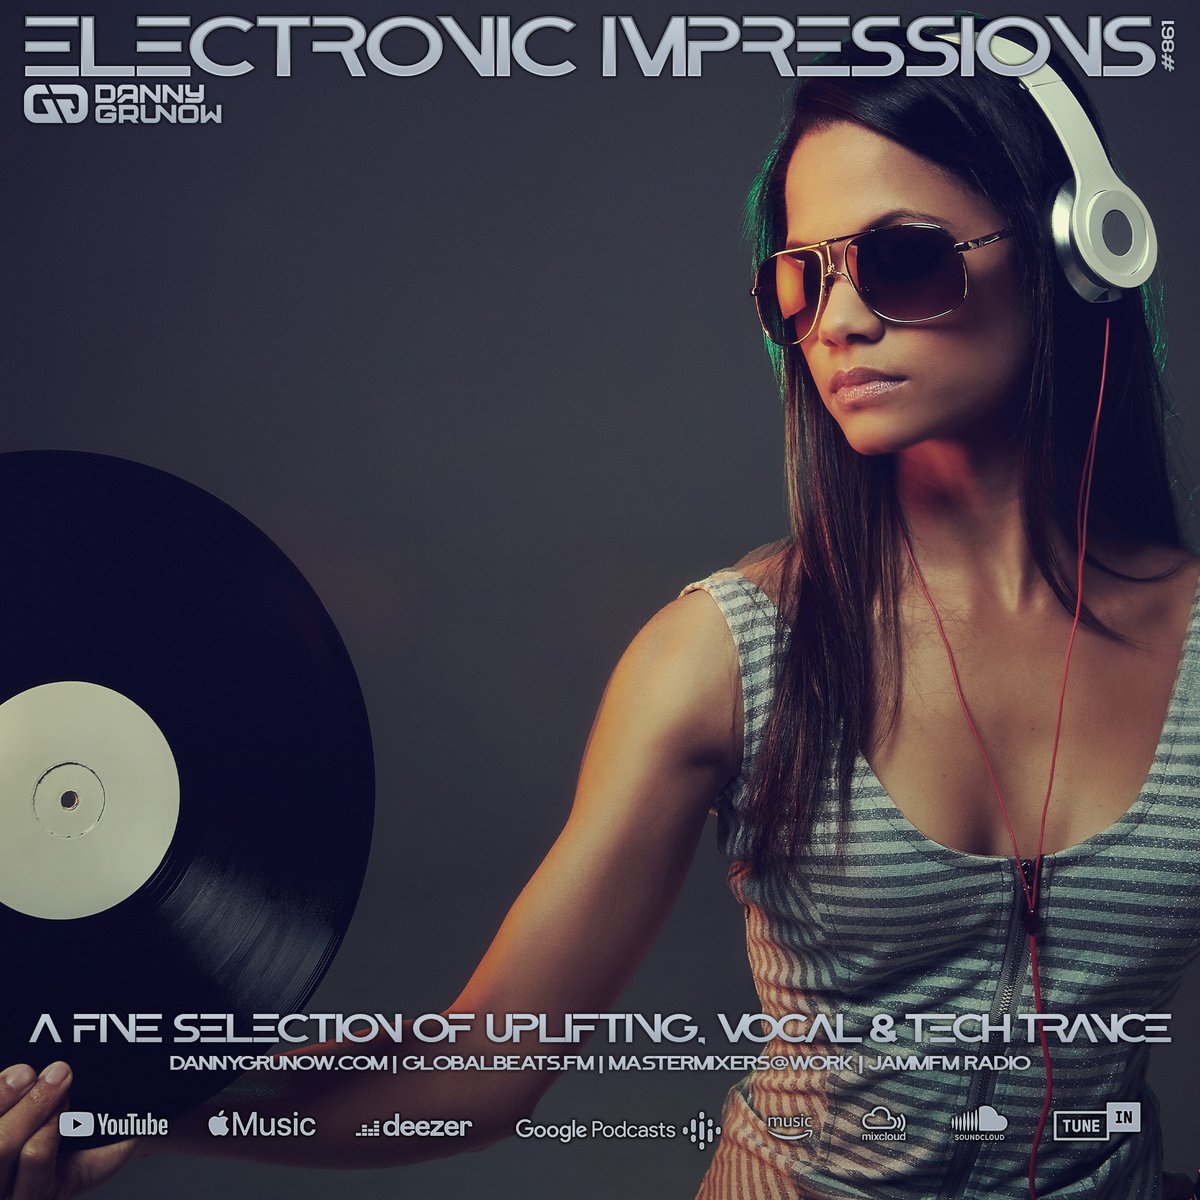 Welcome back #Trancelovers

Are you ready for new & exclusive music? Get ready for #861 of Electronic Impressions, live on Youtube 6PM CET: youtu.be/Ob7Pg7hqomI

Hope you can tune in, so enjoy the music.

#Trance #Trancefamily #UpliftingTrance #VocalTrance #TechTrance